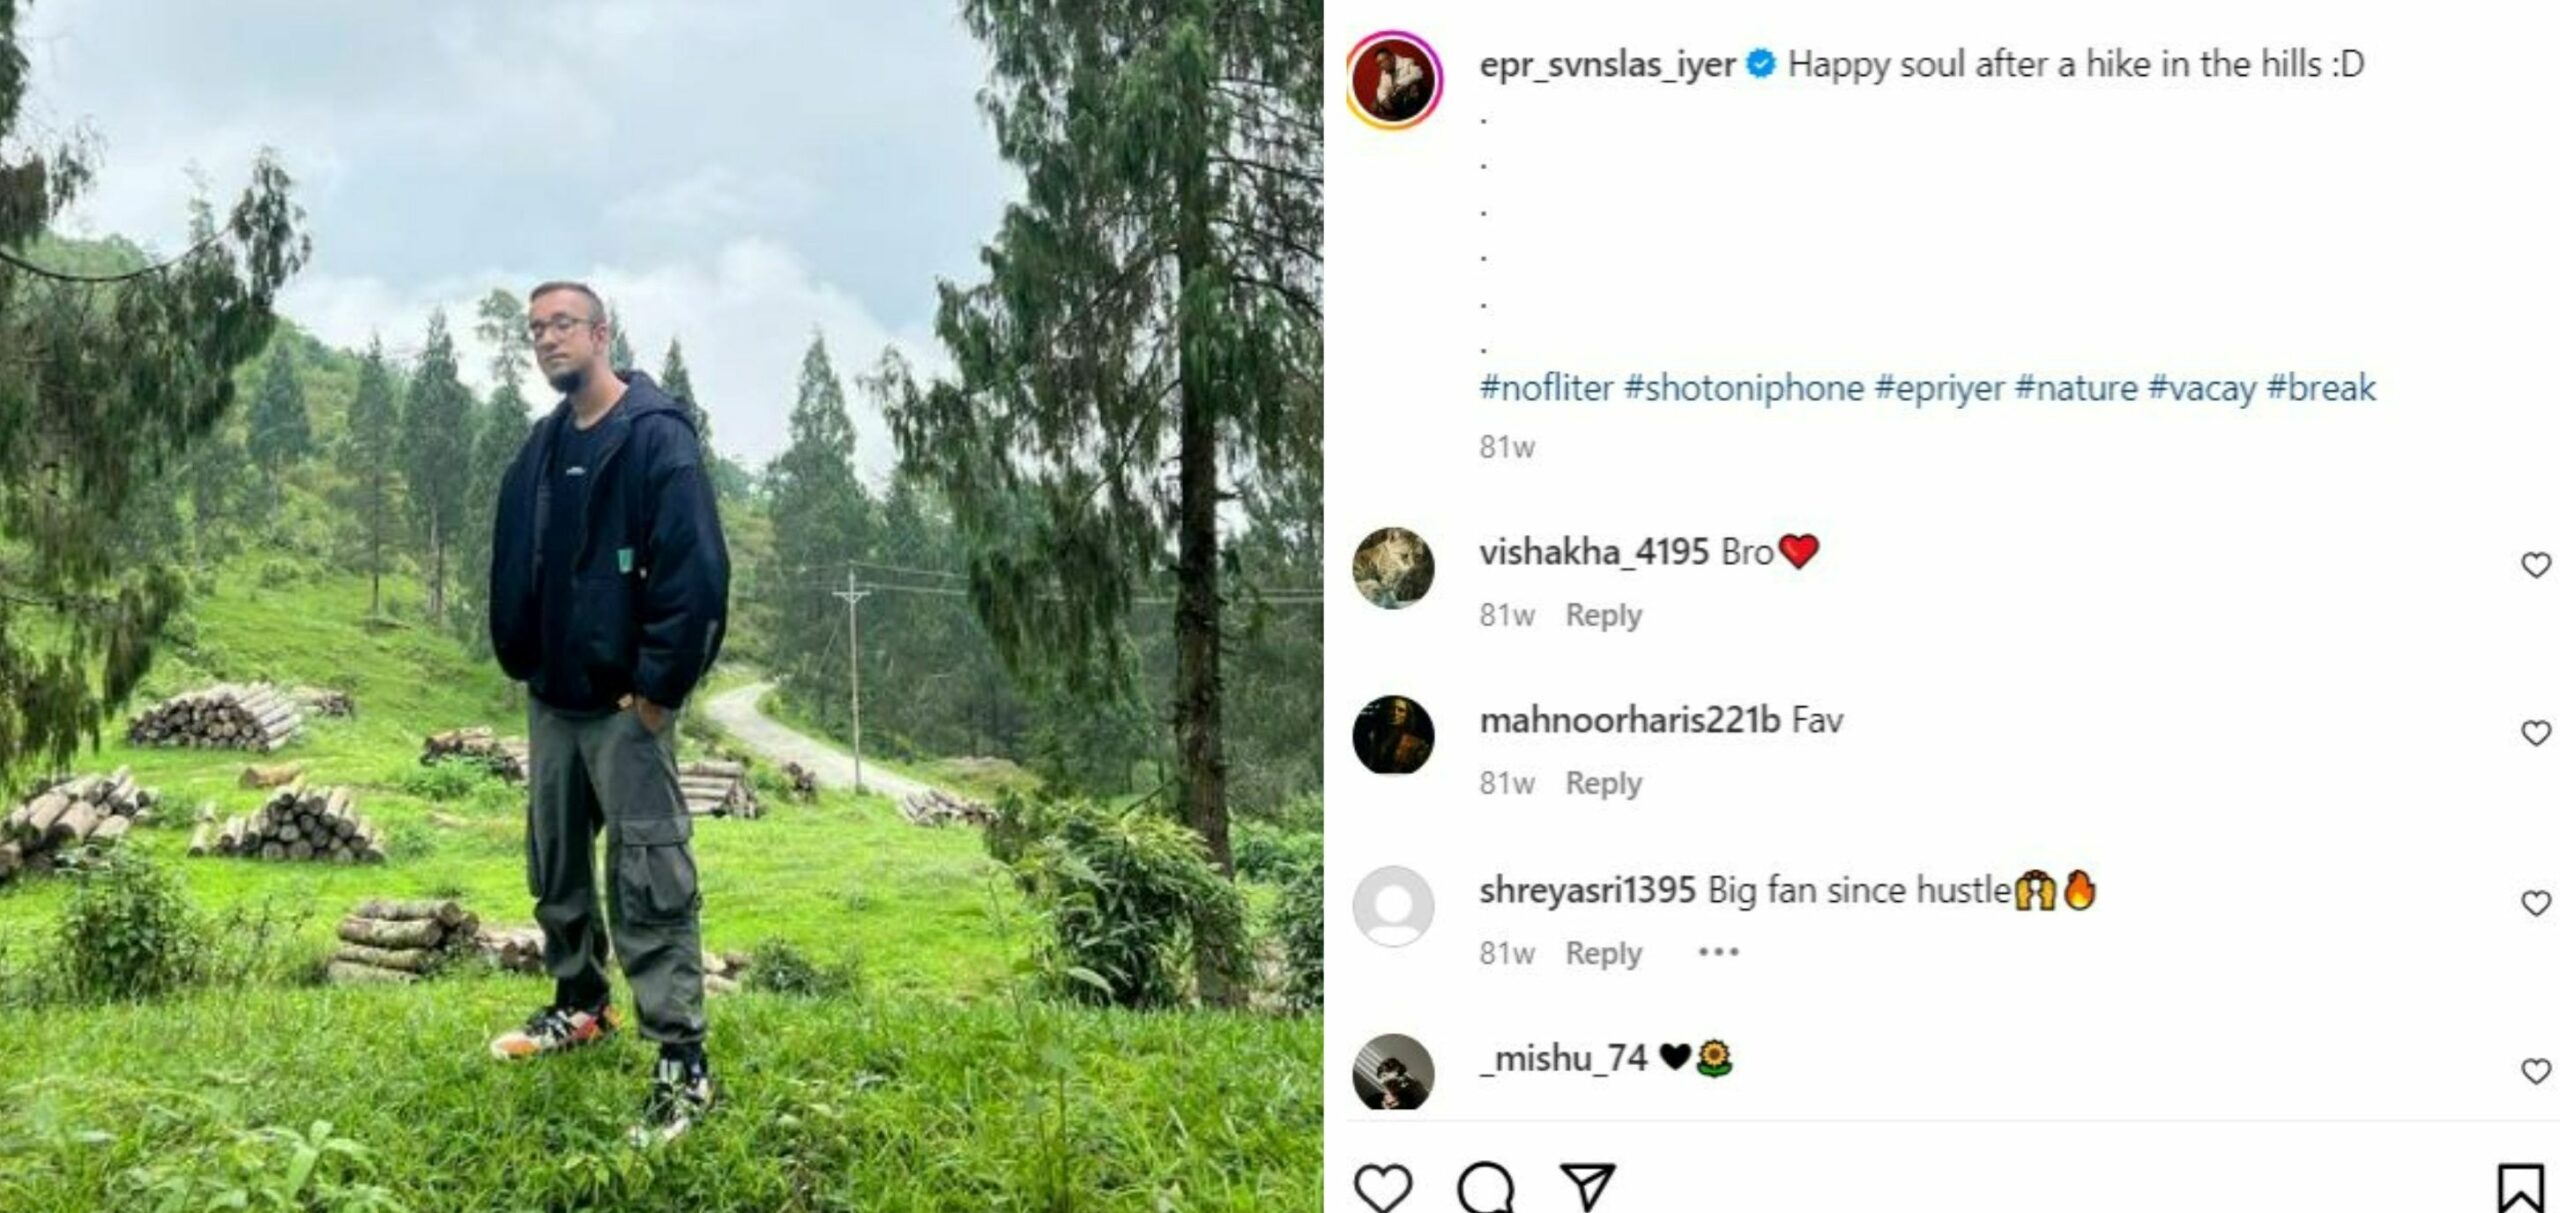 EPR Iyer's Instagram post about hiking